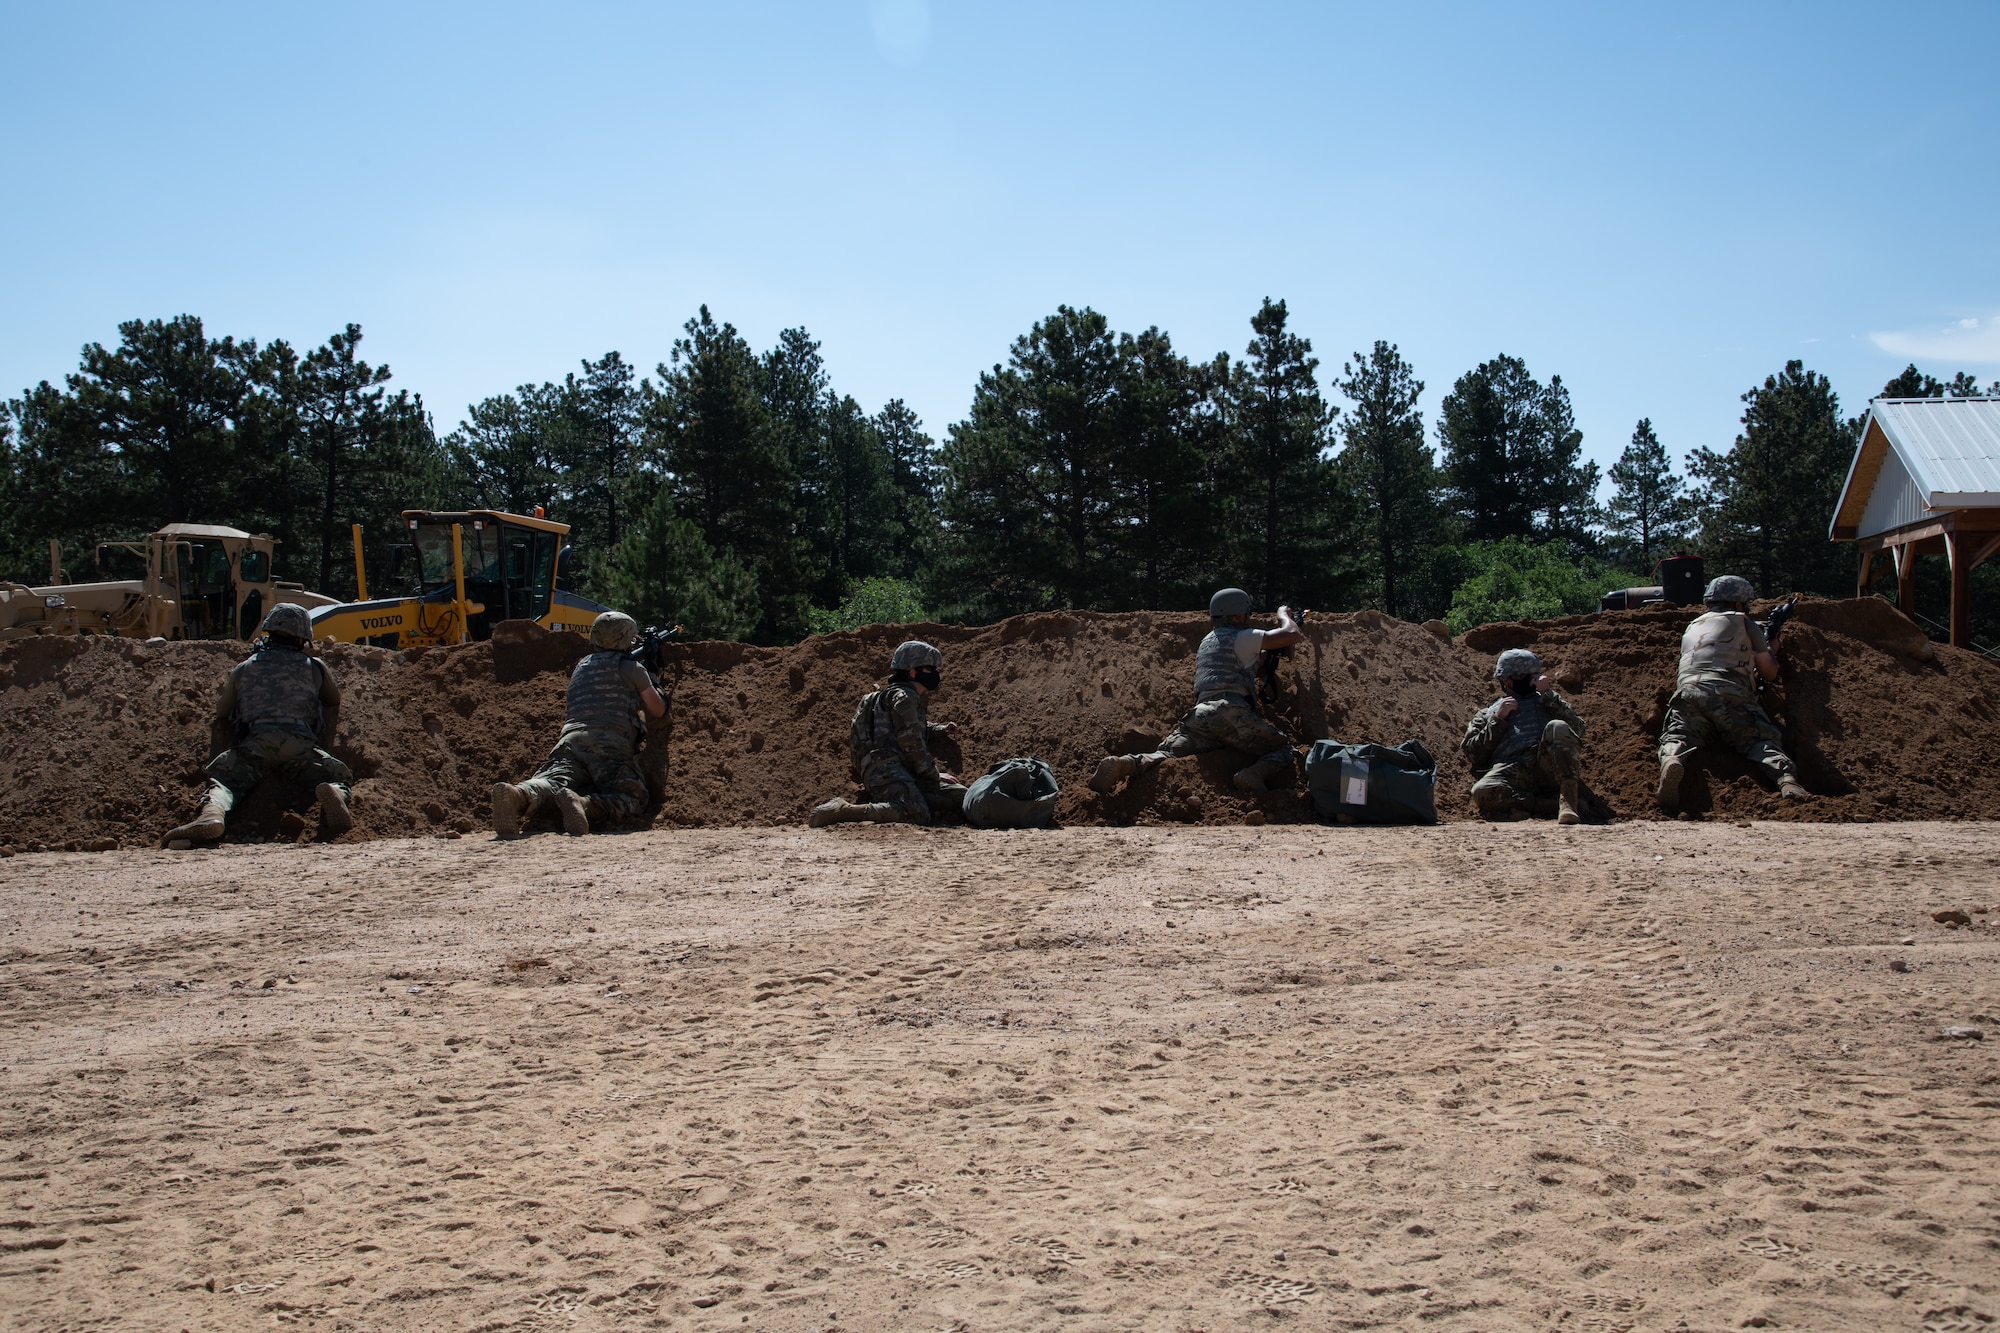 Six Airmen with rifles lined up behind a dirt mound, taking cover after hearing simulated gunfire in the distance during an exercise.